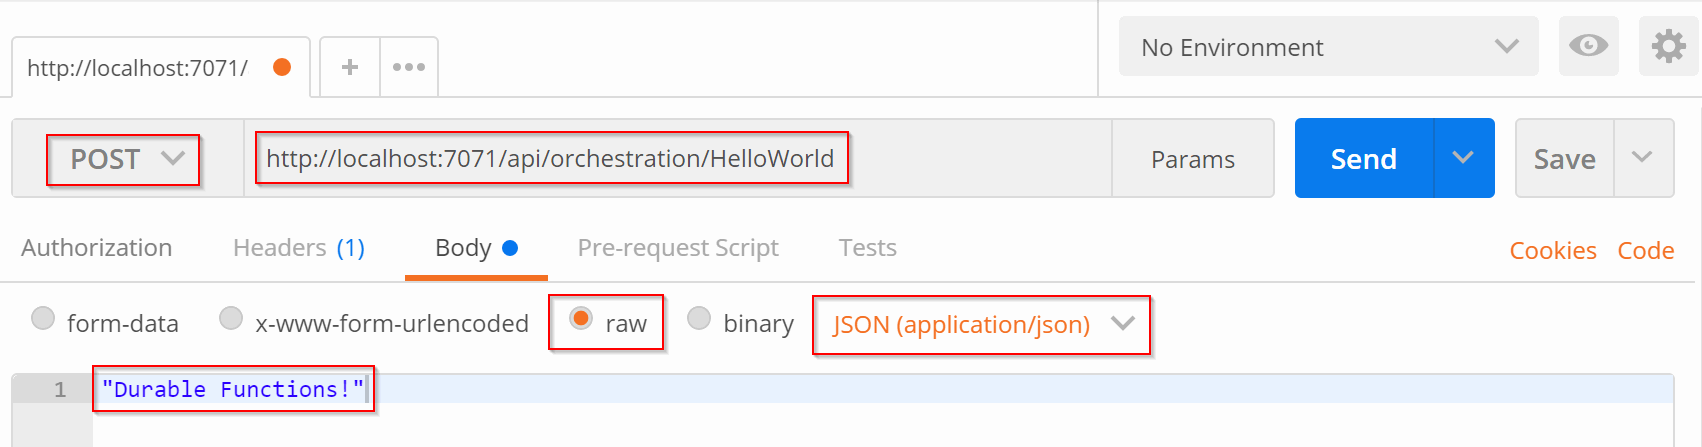 Request to orchestration/HelloWorld